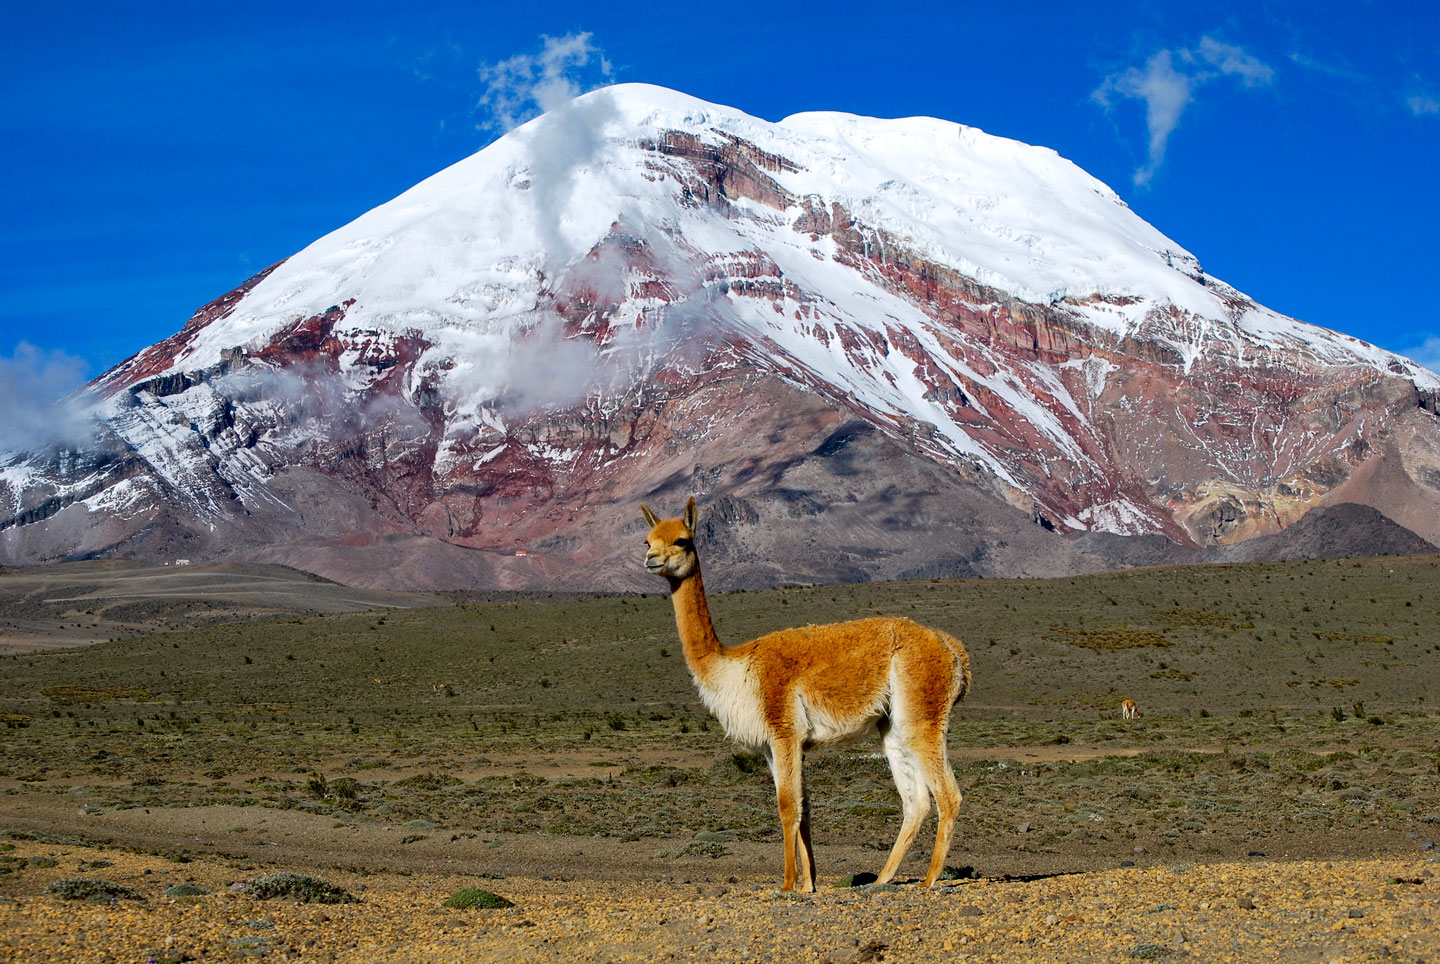 A vicuña poses in front of Chimborazo, Ecuador's highest mountain at 6,263 meters.